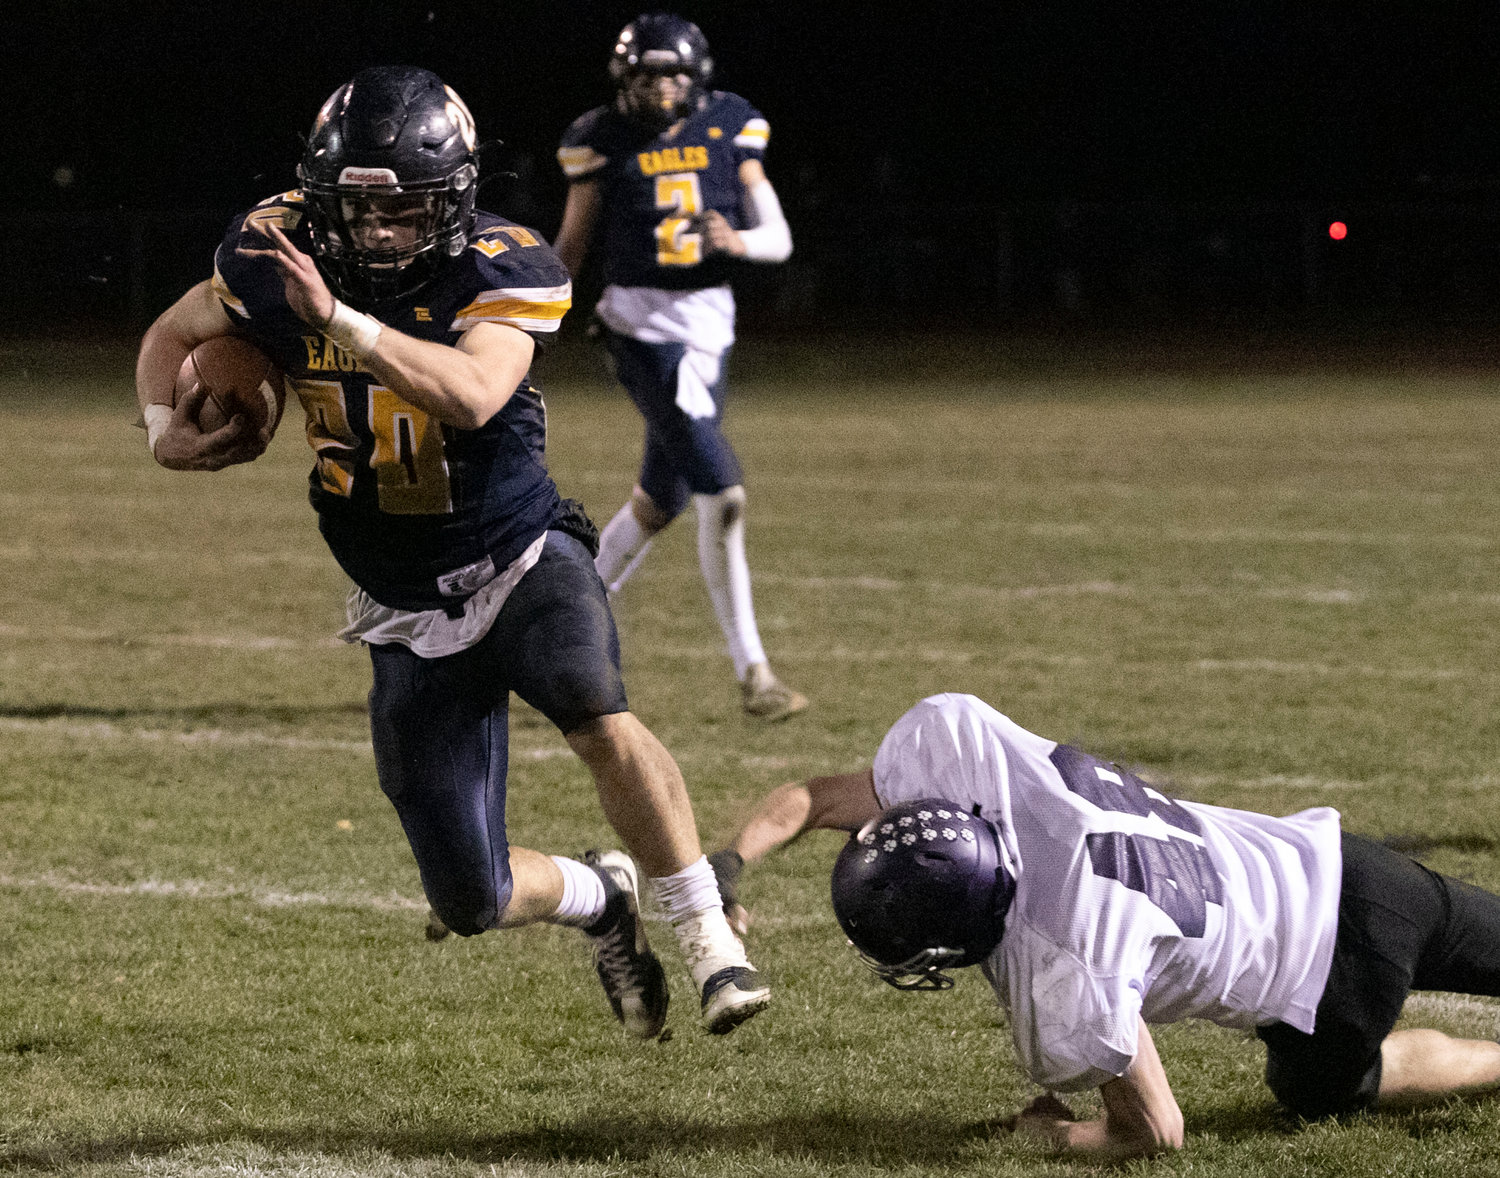 Senior running back Bryan Ivatts breaks a tackle for a long gain in the first half.